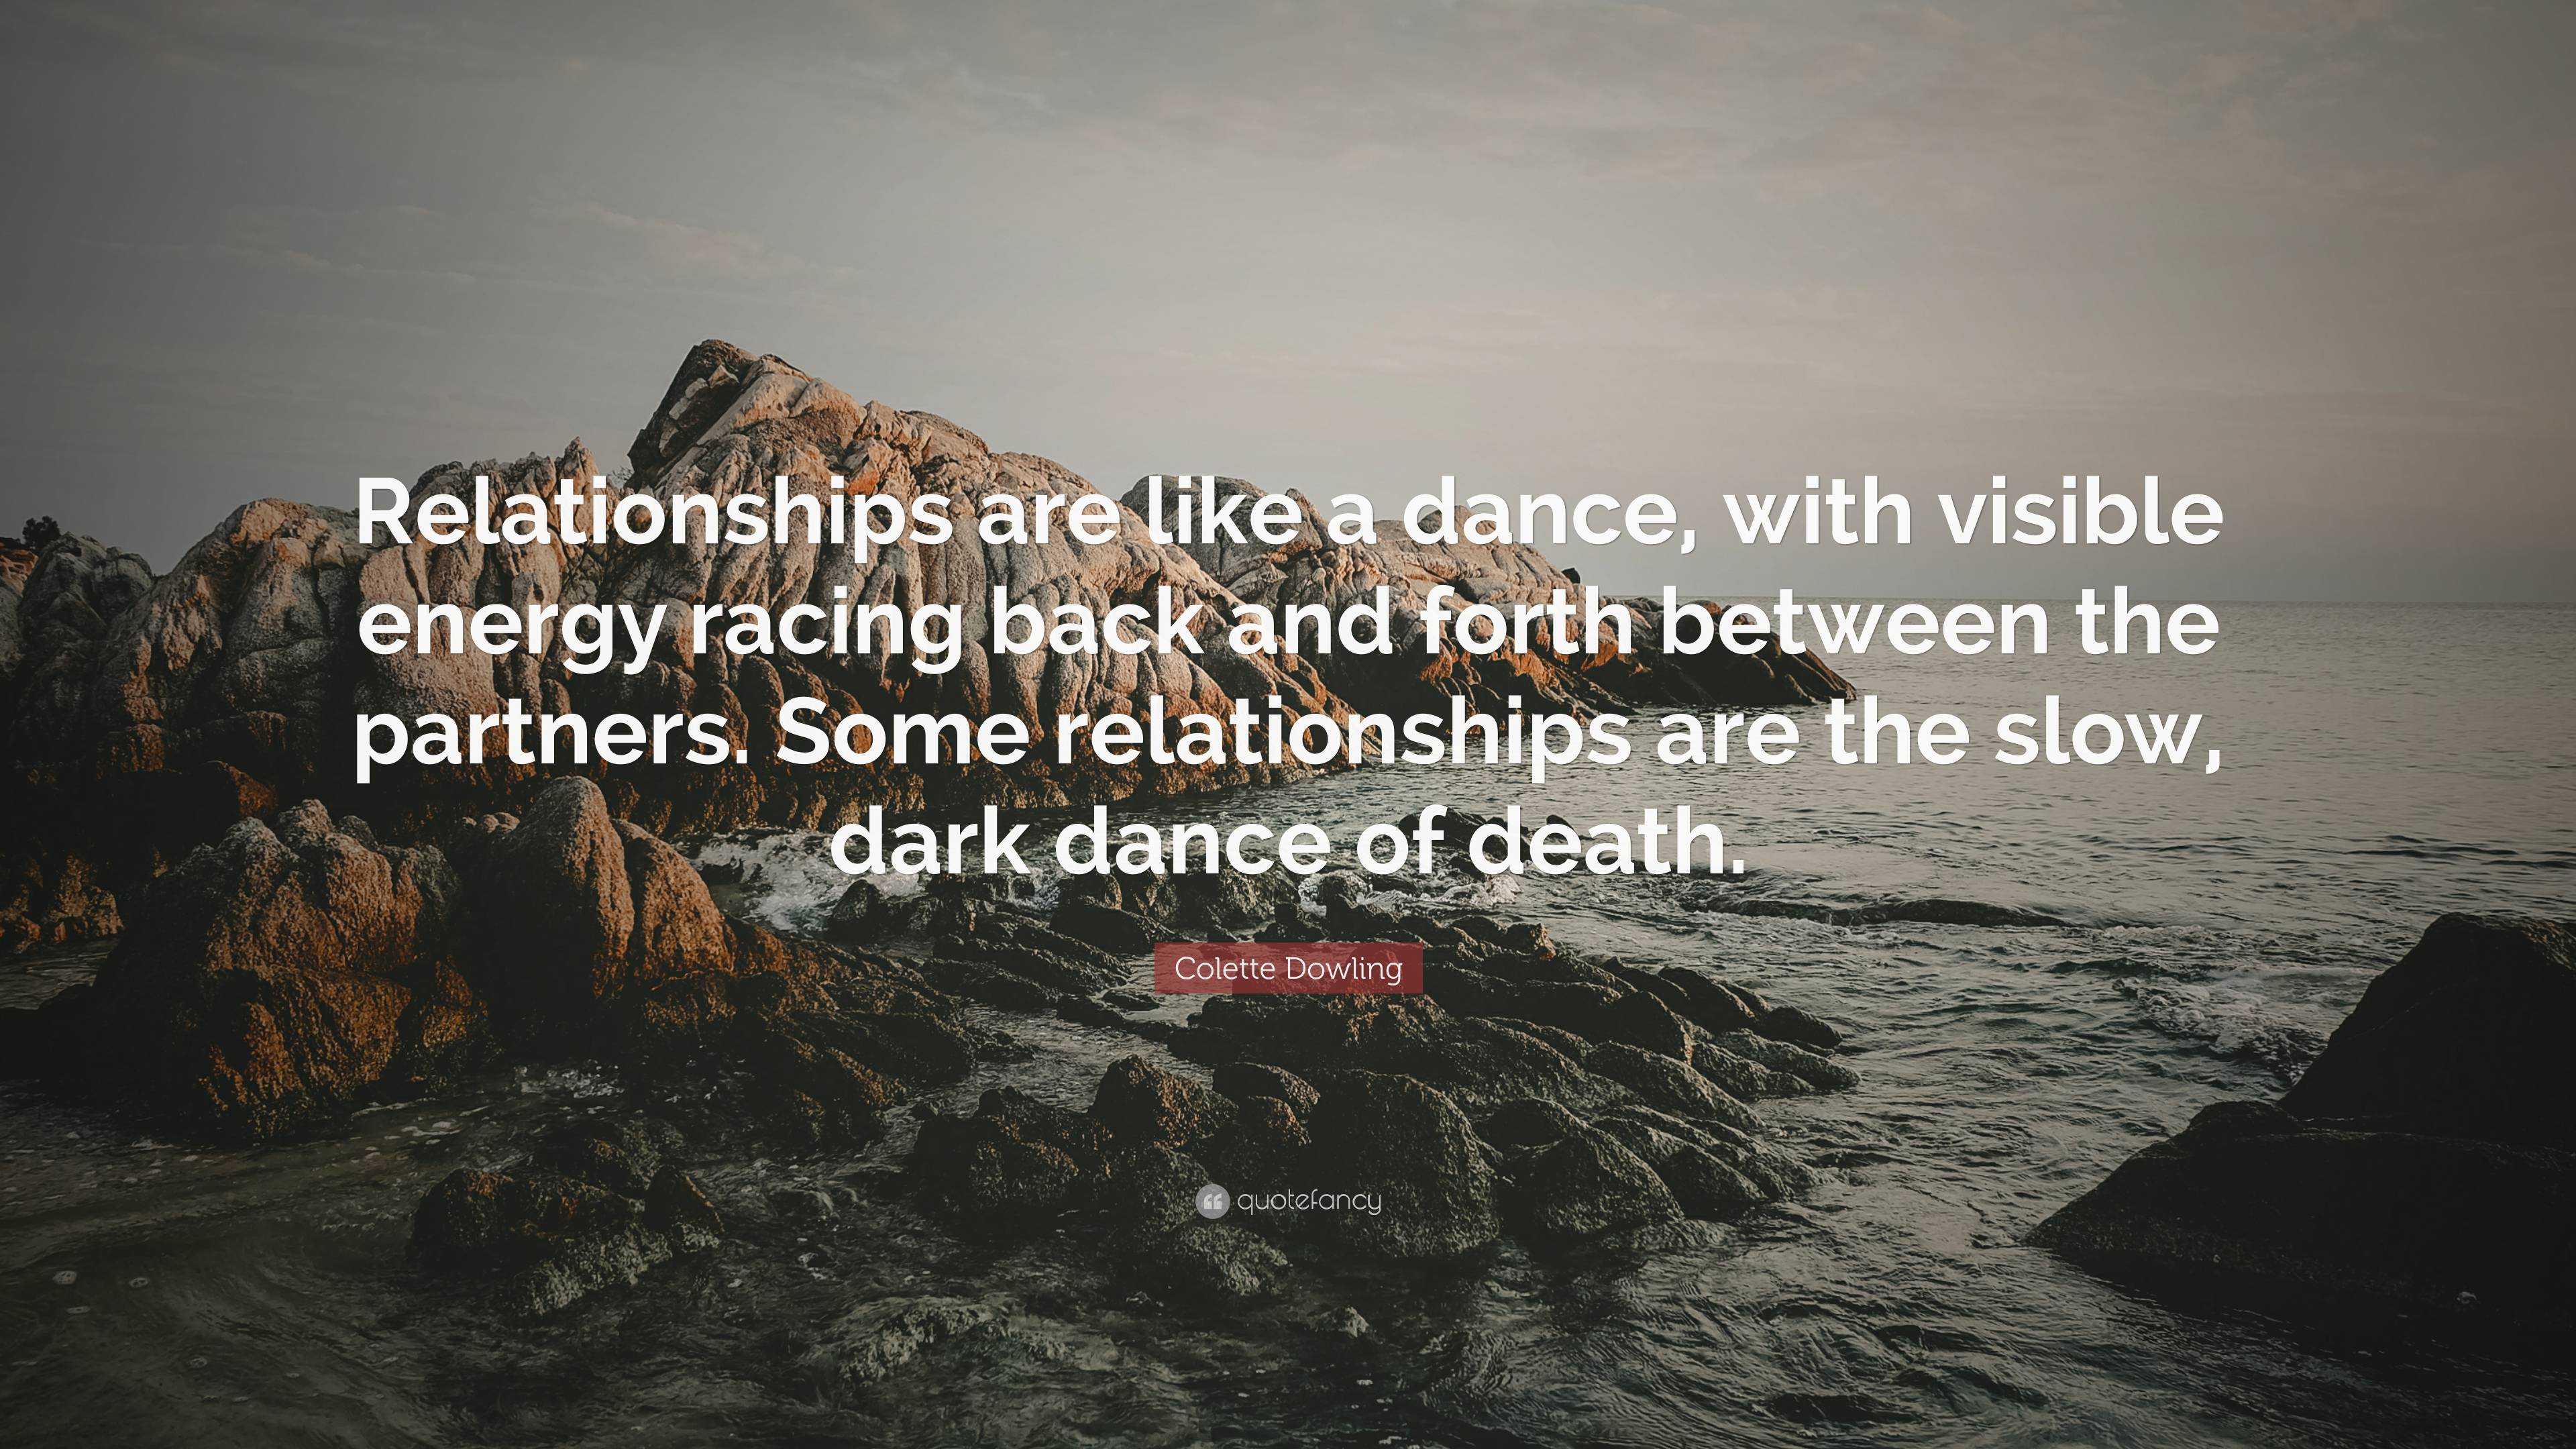 What are examples of relationships in dance?